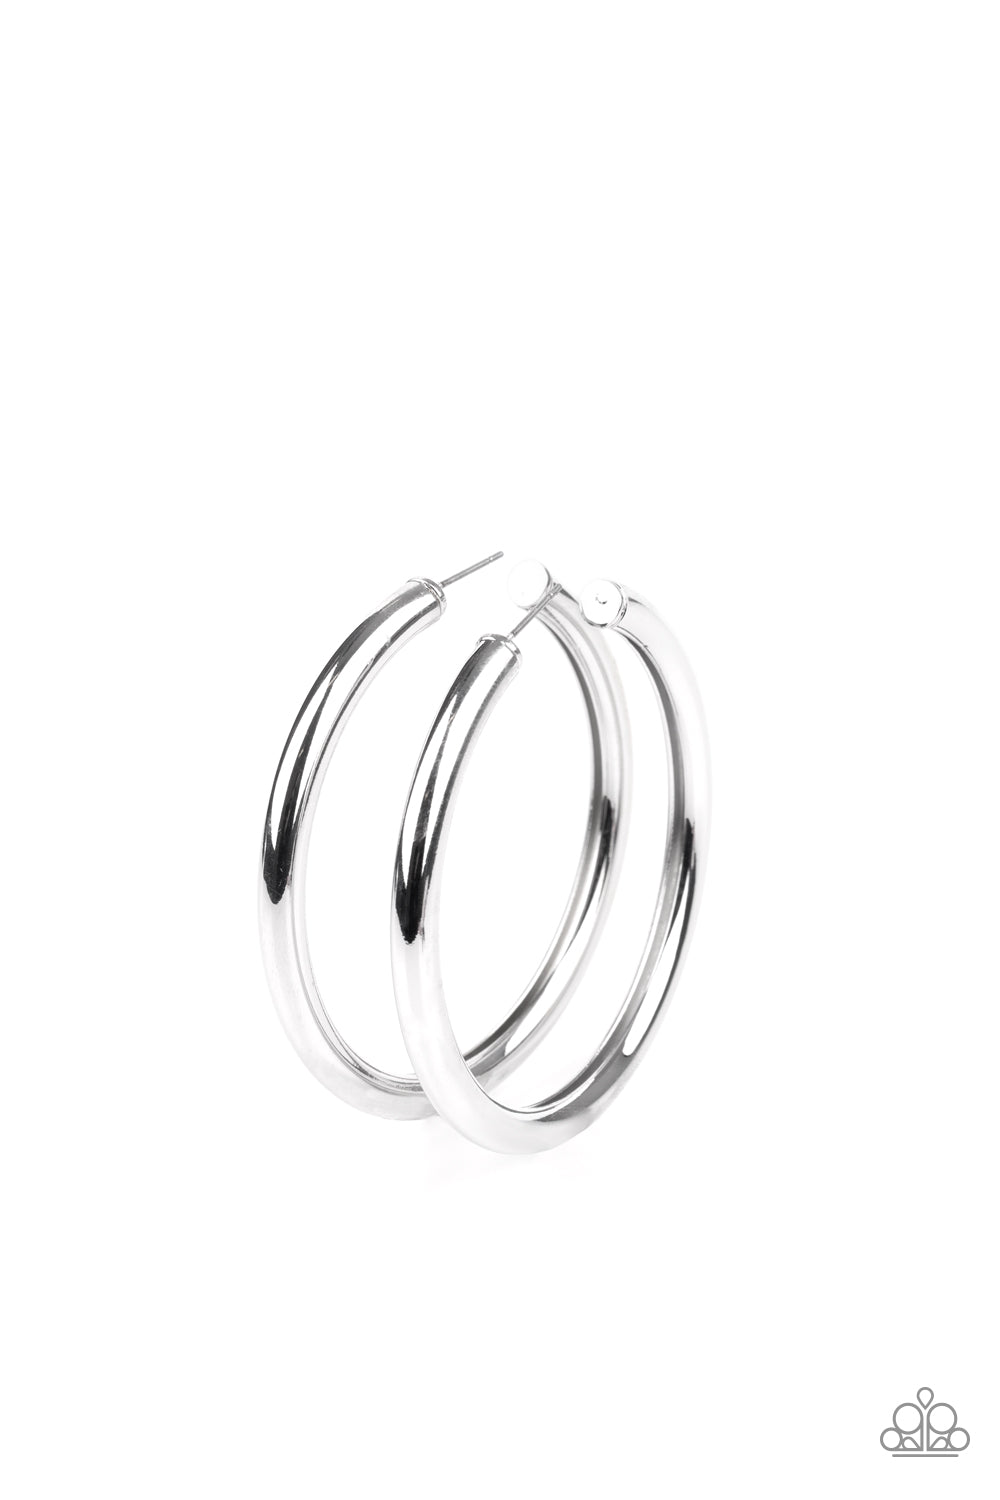 Paparazzi large hoops with a thick silver bar delicately curls into a glistening oversized hoop for a retro look